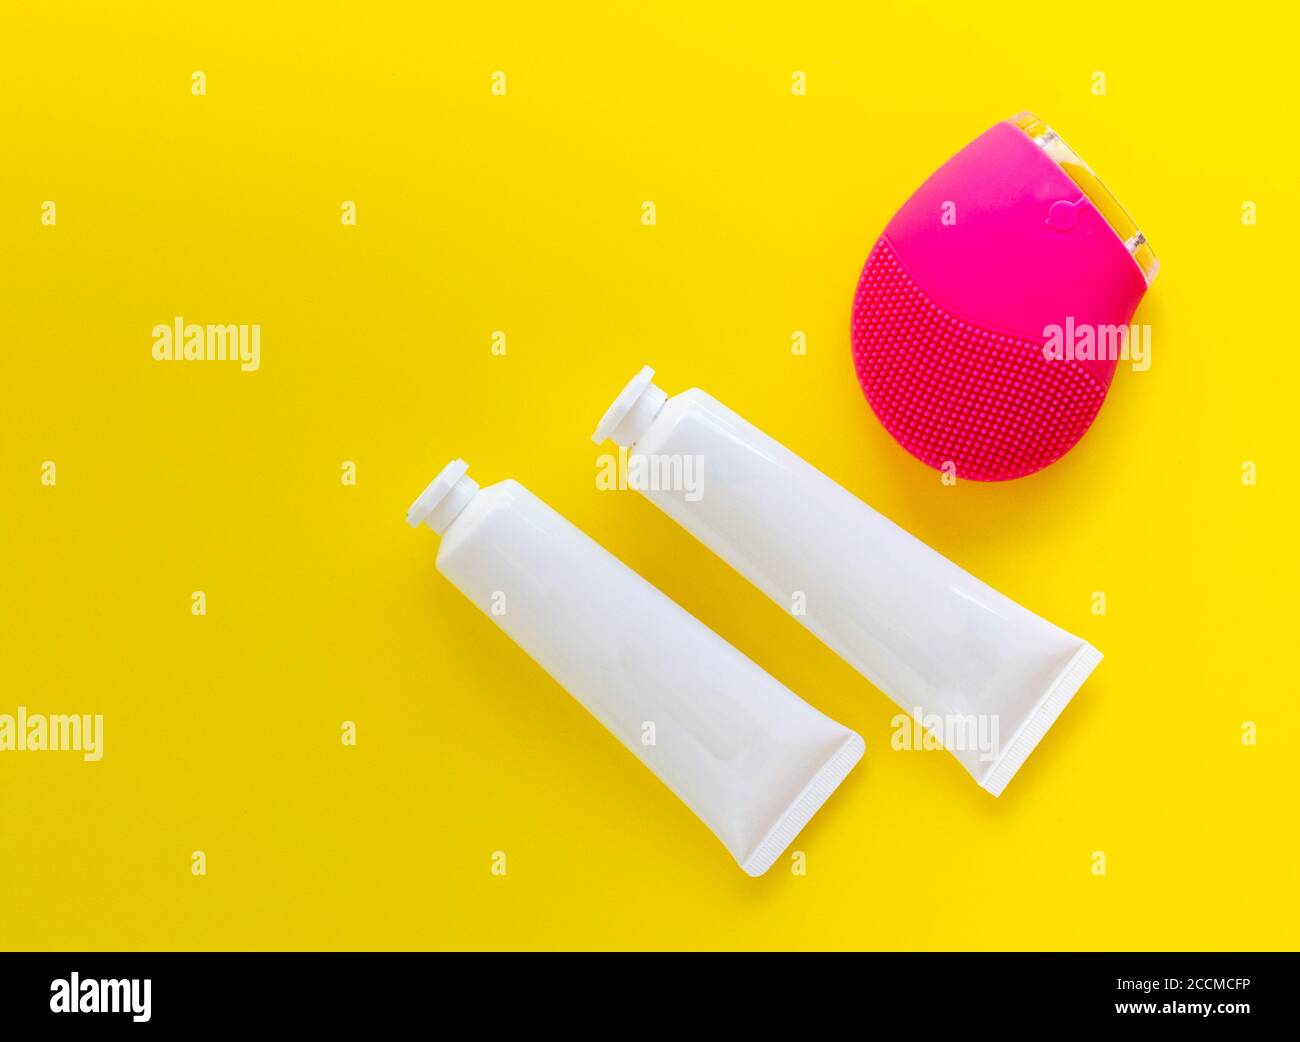 cosmetic mockup for skincare products with pink facial cleansing brush Stock Photo